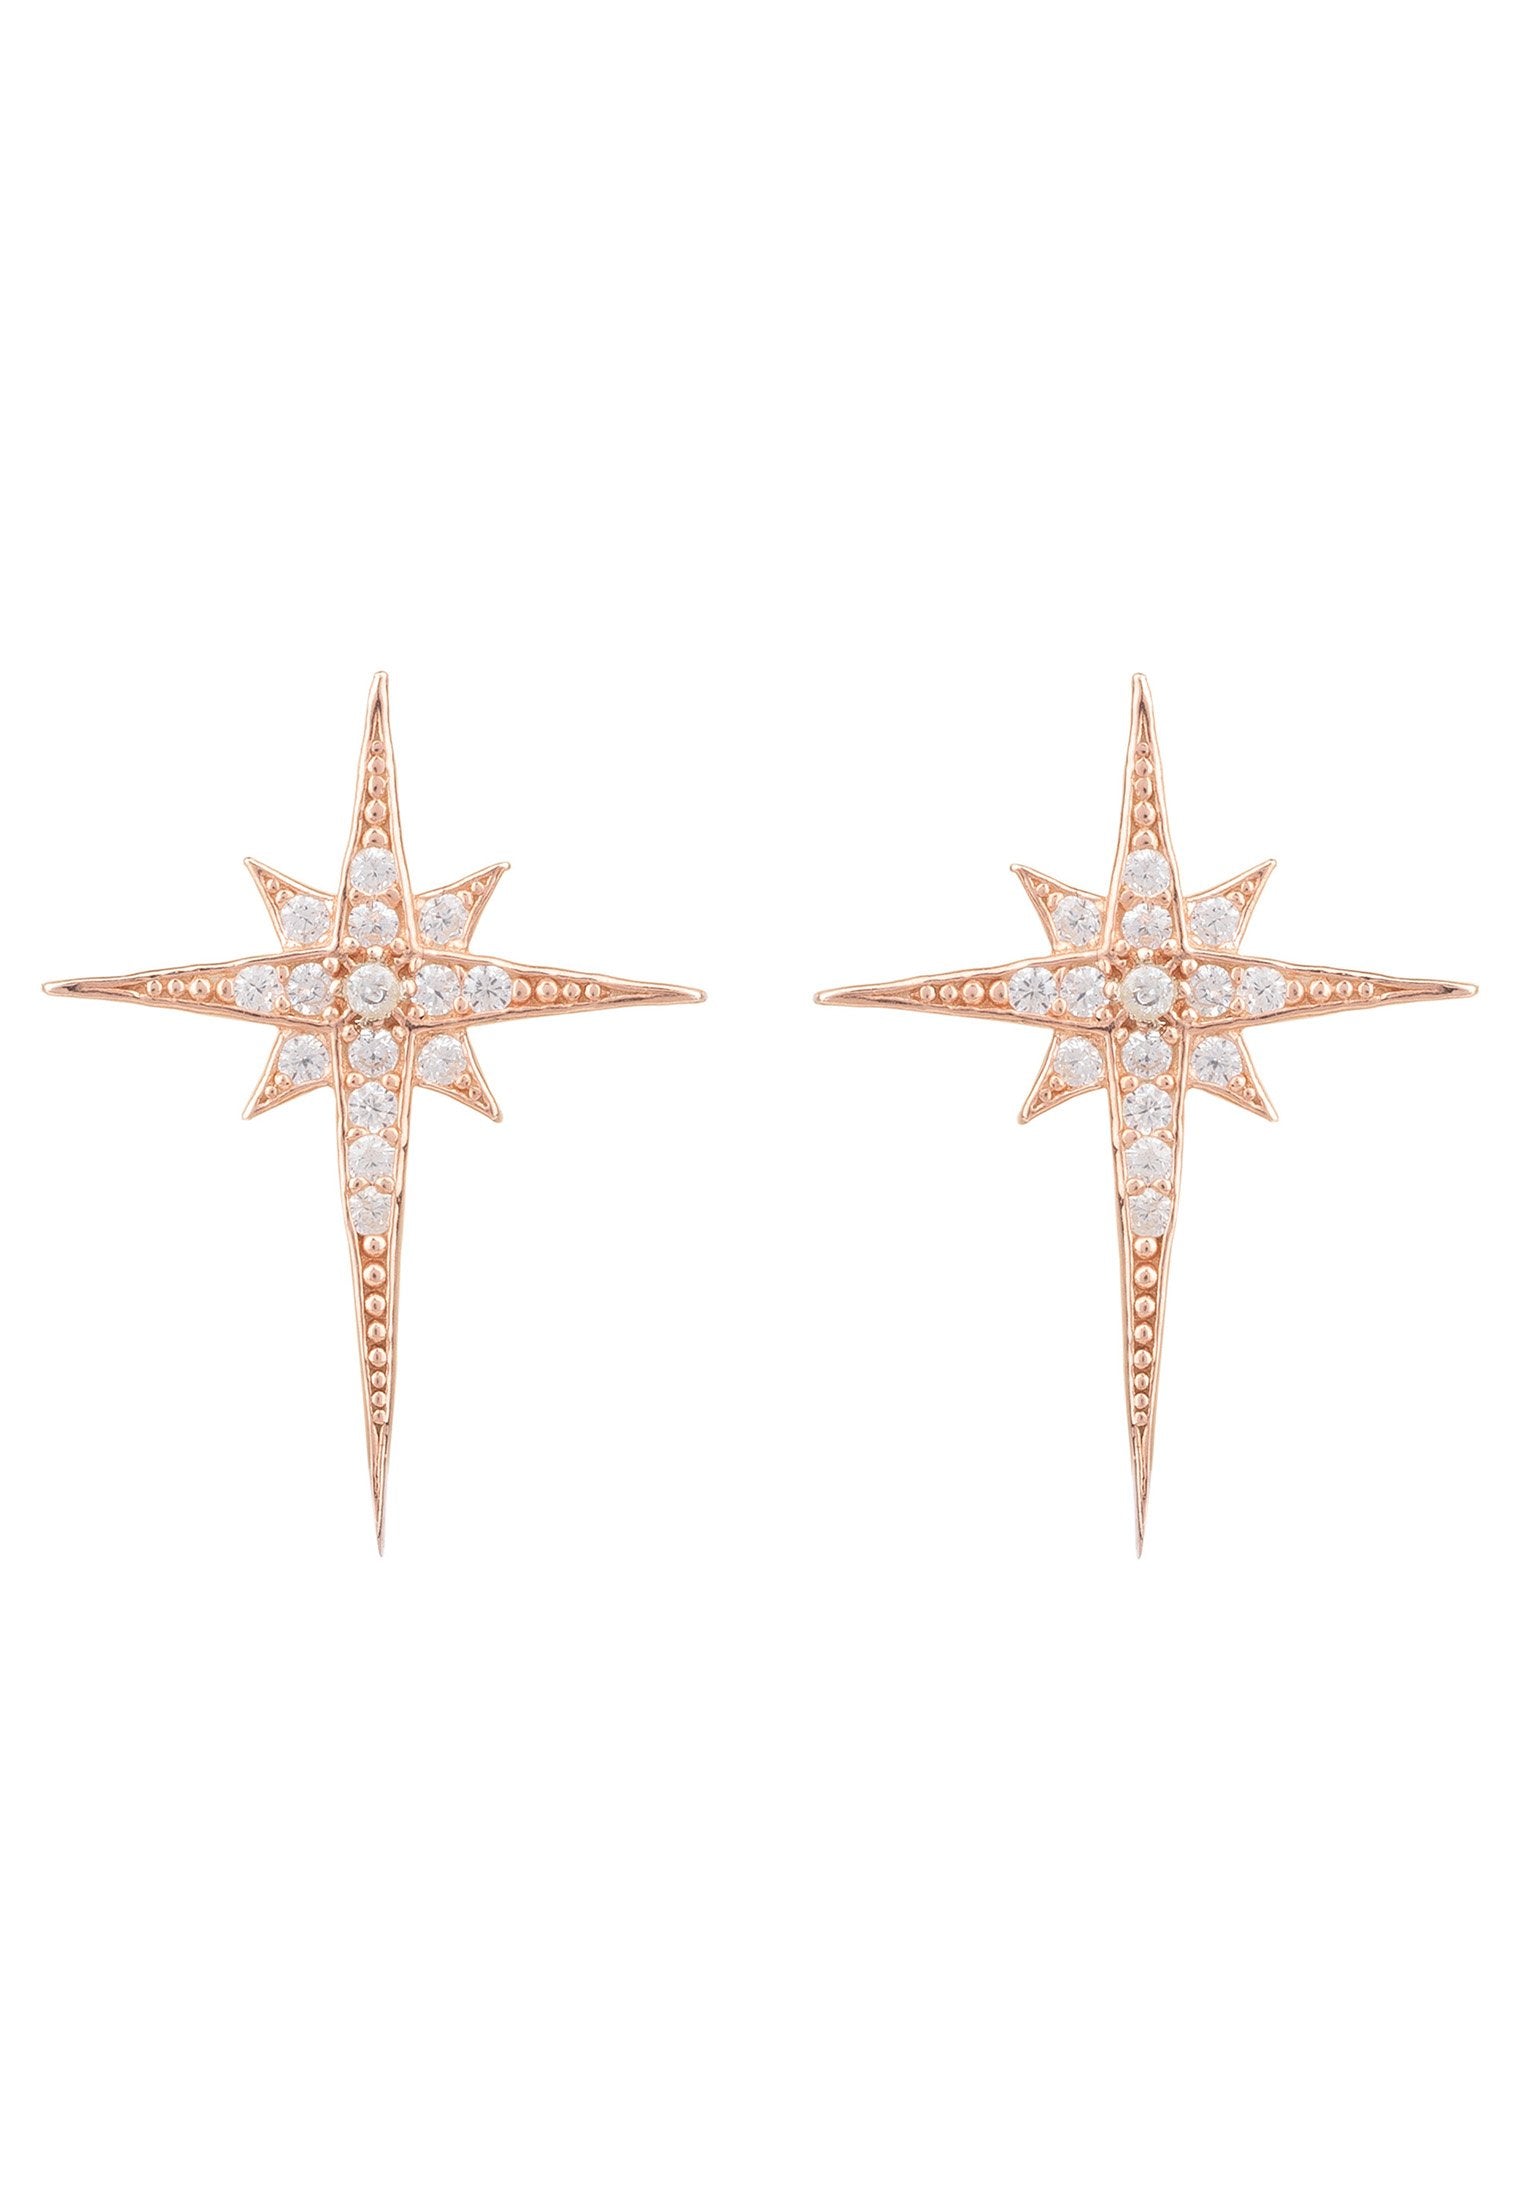 Rosegold North Star Stud Earrings with White Zirconia - Delicate and Glamorous Jewelry for Celebrations and Weddings - Jewelry & Watches - Bijou Her -  -  - 